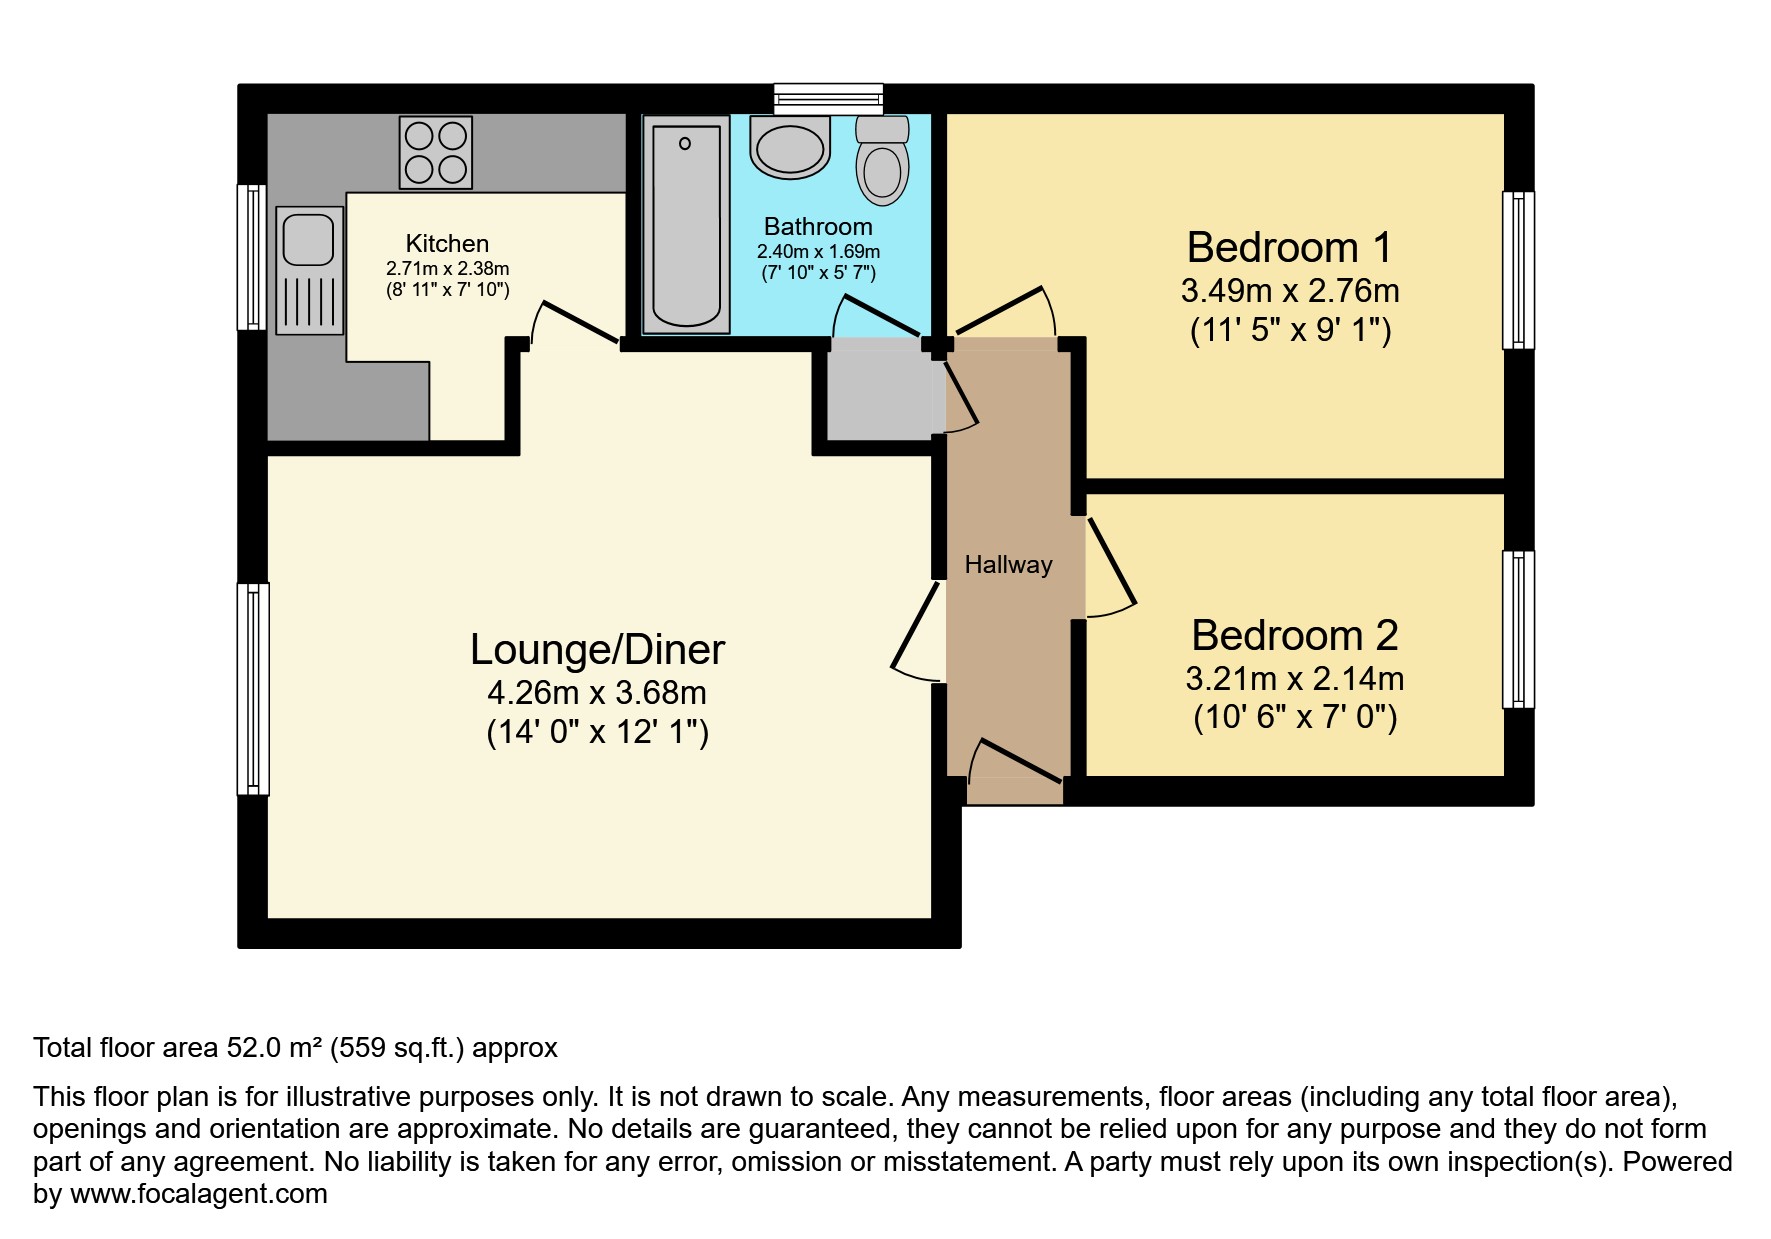 Floor plan of this Property